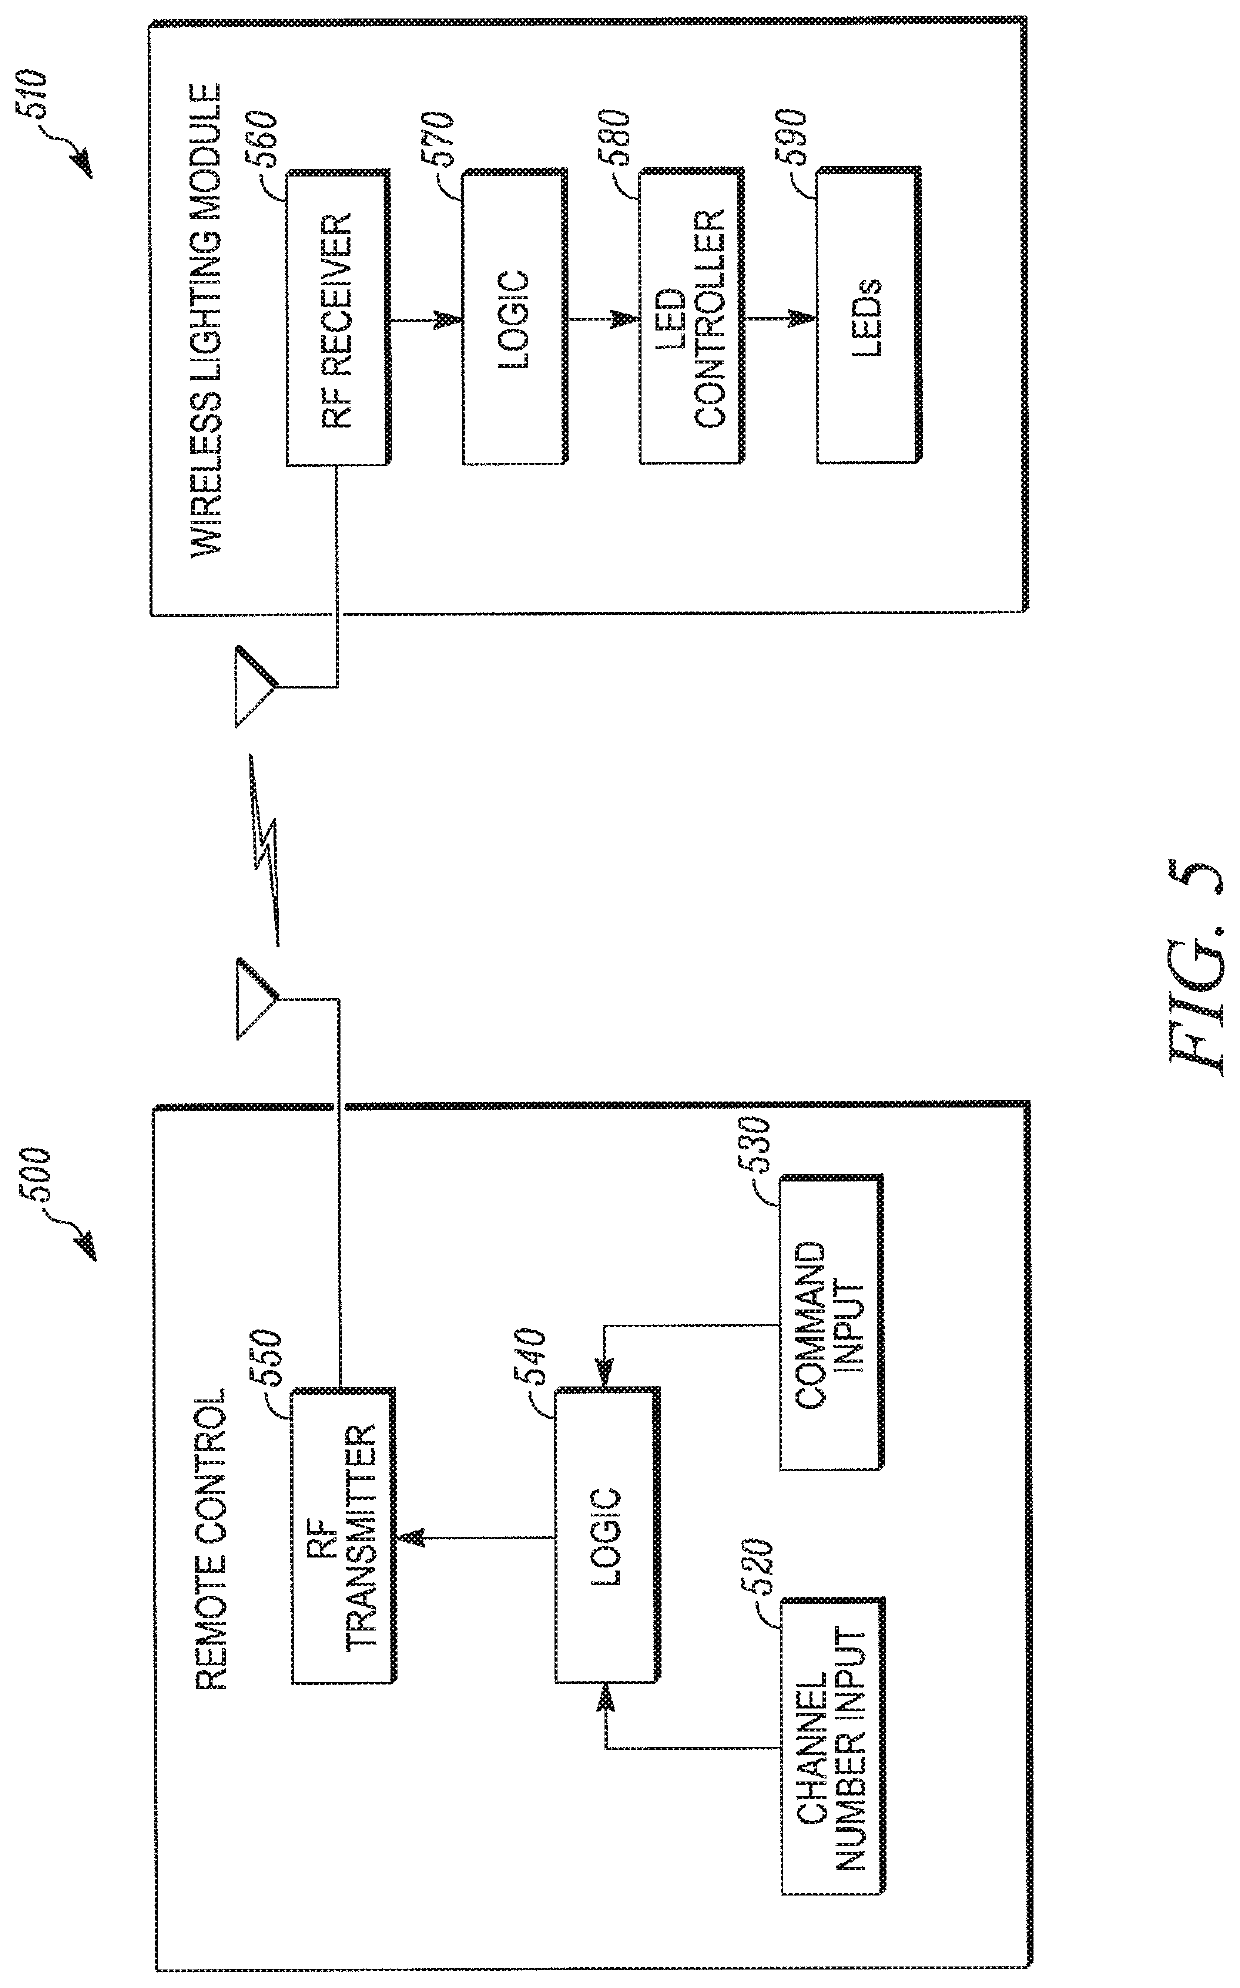 Bridge device for connecting electronic devices